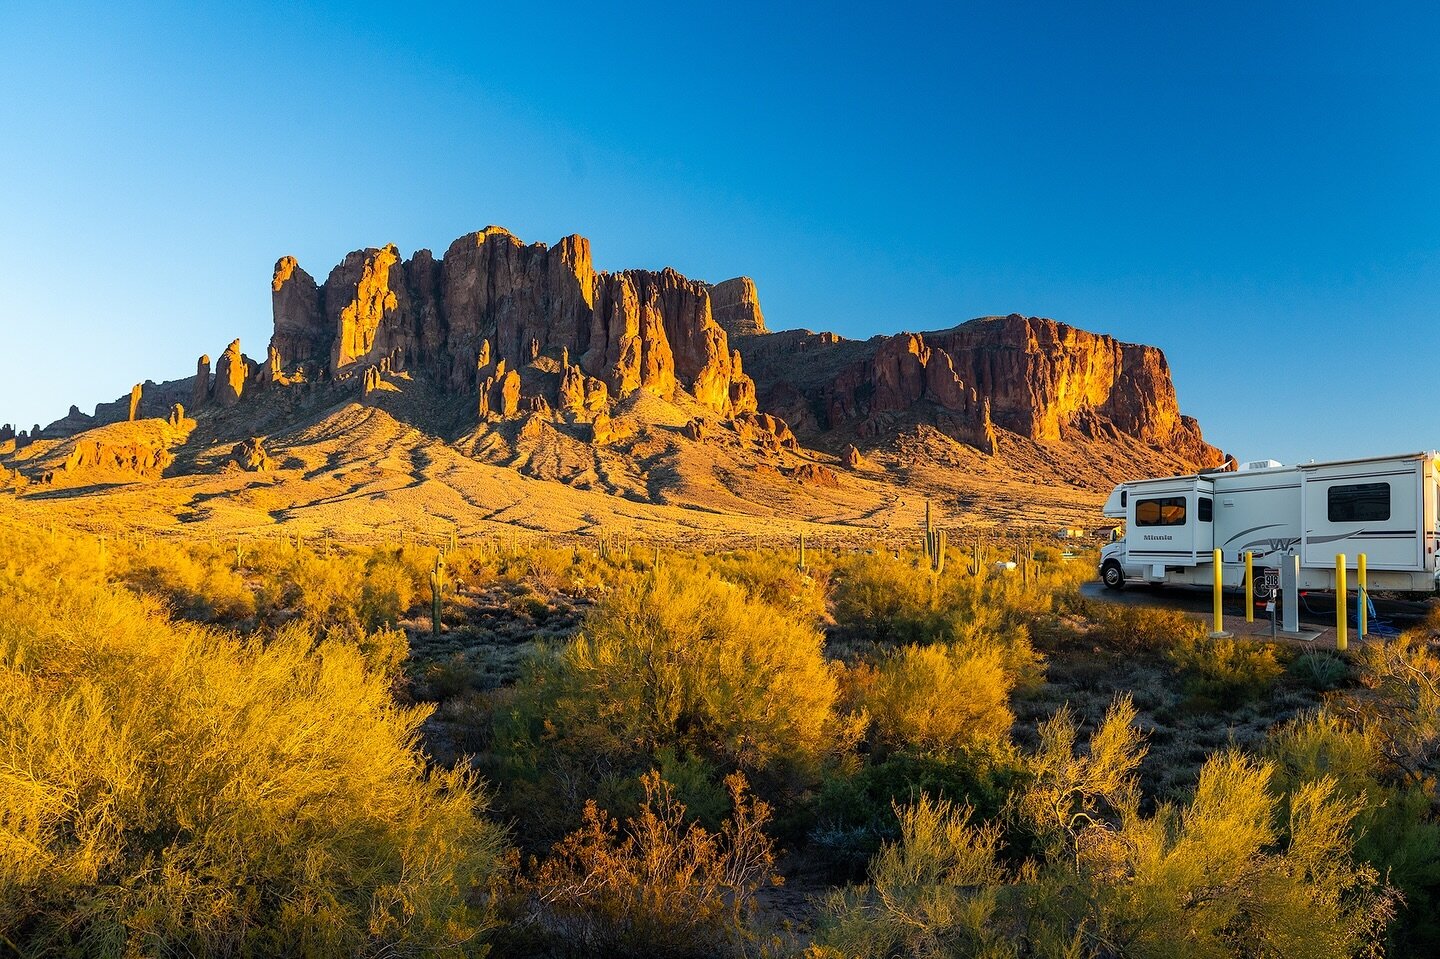 Legend has it that 100 years ago a Dutchman came out of these mountains with an armful of gold. They&rsquo;re called the Superstition Mountains and the gold mine has never been found. #arizona #lostdutchmanstatepark #rvlife